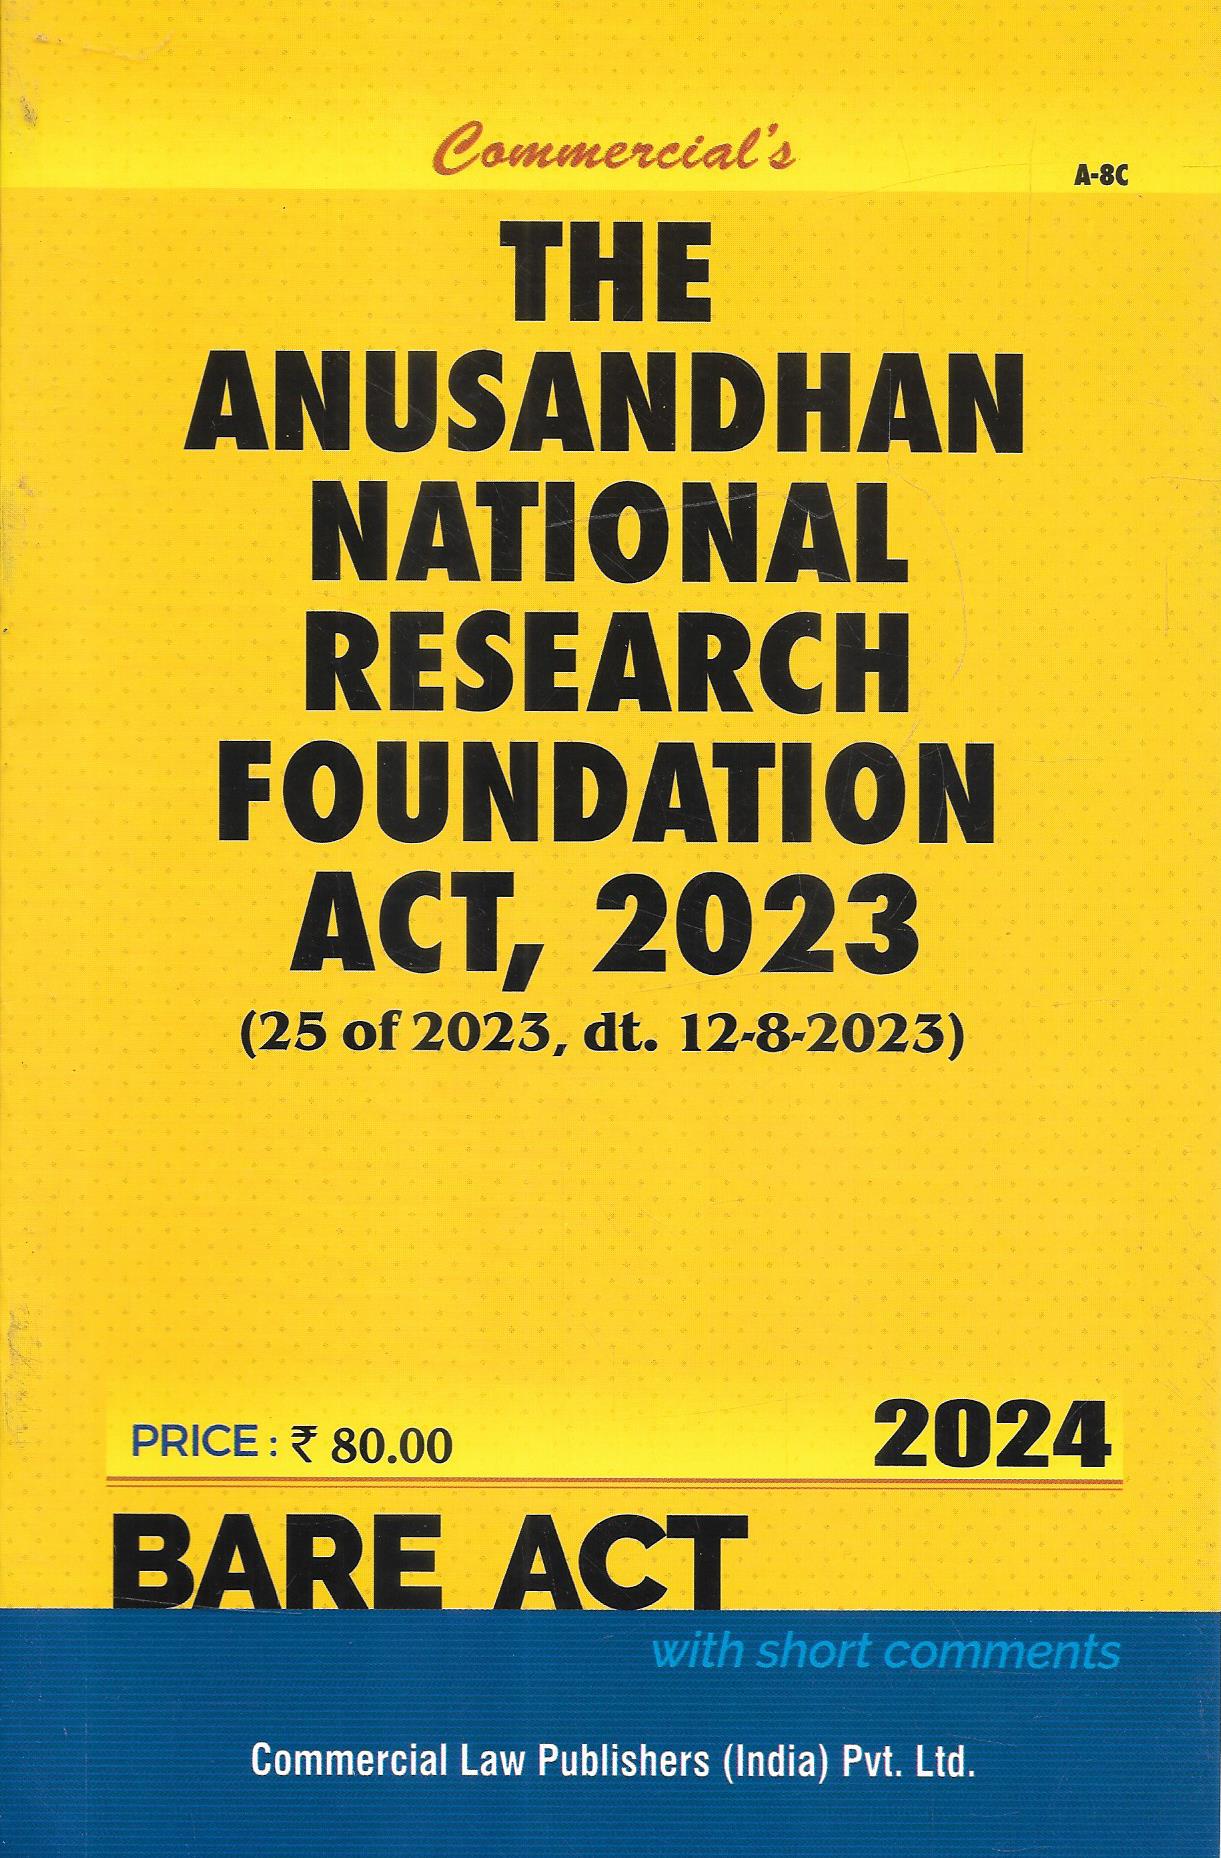 The Anusandhan National Research Foundation Act, 2023